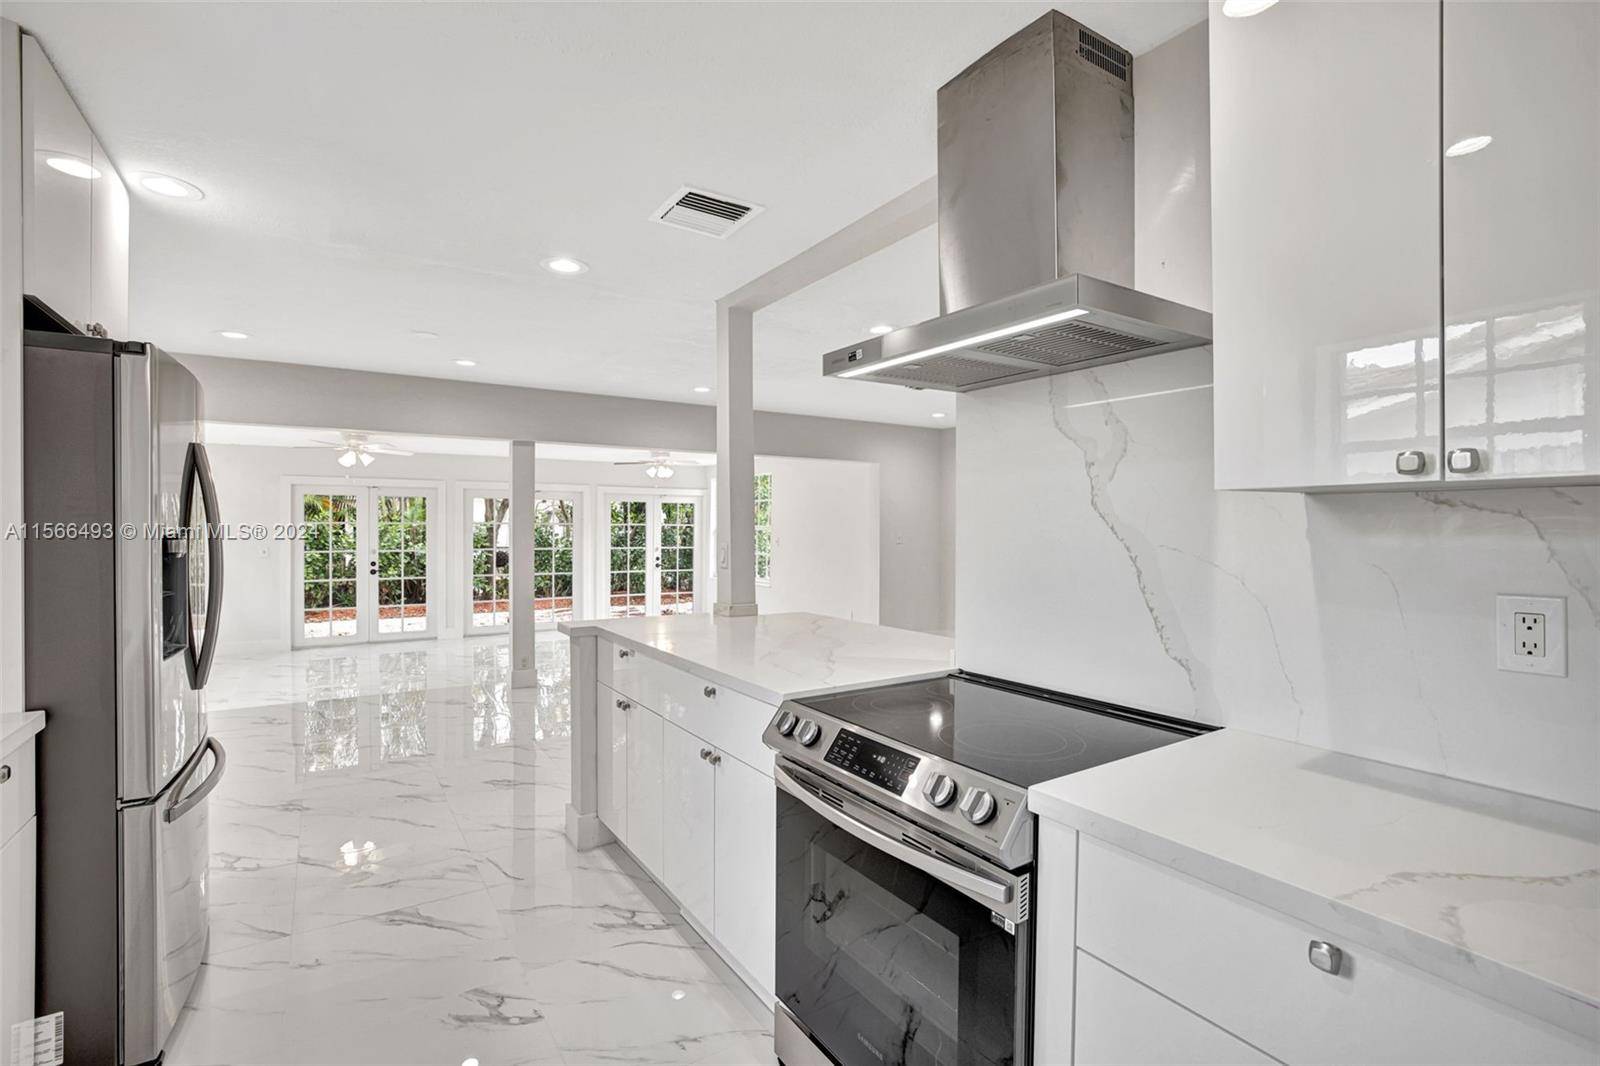 Gorgeous Imperial Point Renovated Home w open floor plan, great room w New Quartz Gourmet Kitchen high end Cabinets, hi end Samsung Stainless Steel Appliances.